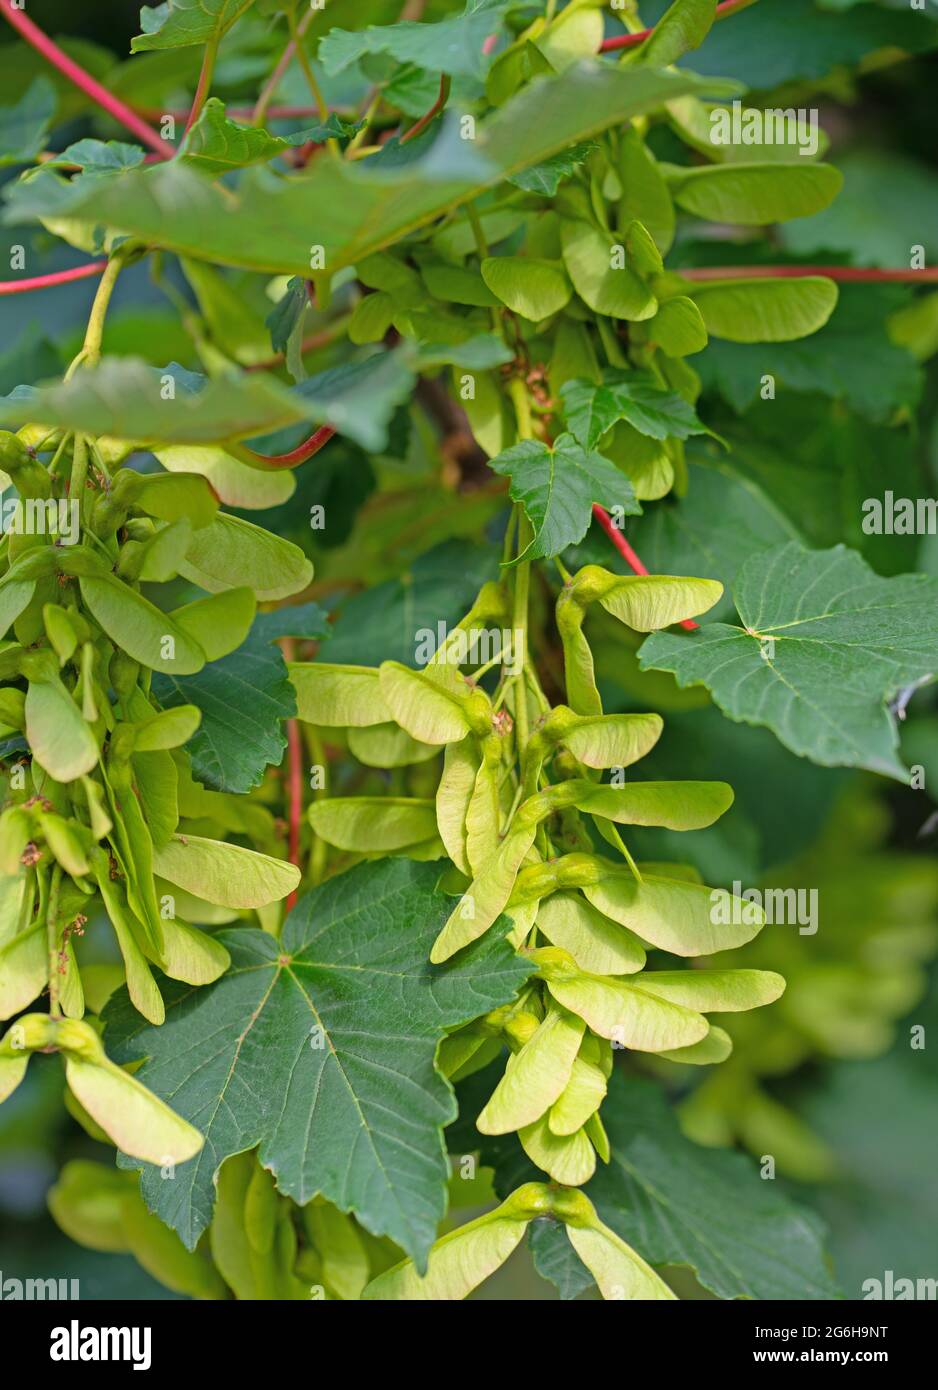 Fruits from the maple tree, acer, in summer Stock Photo